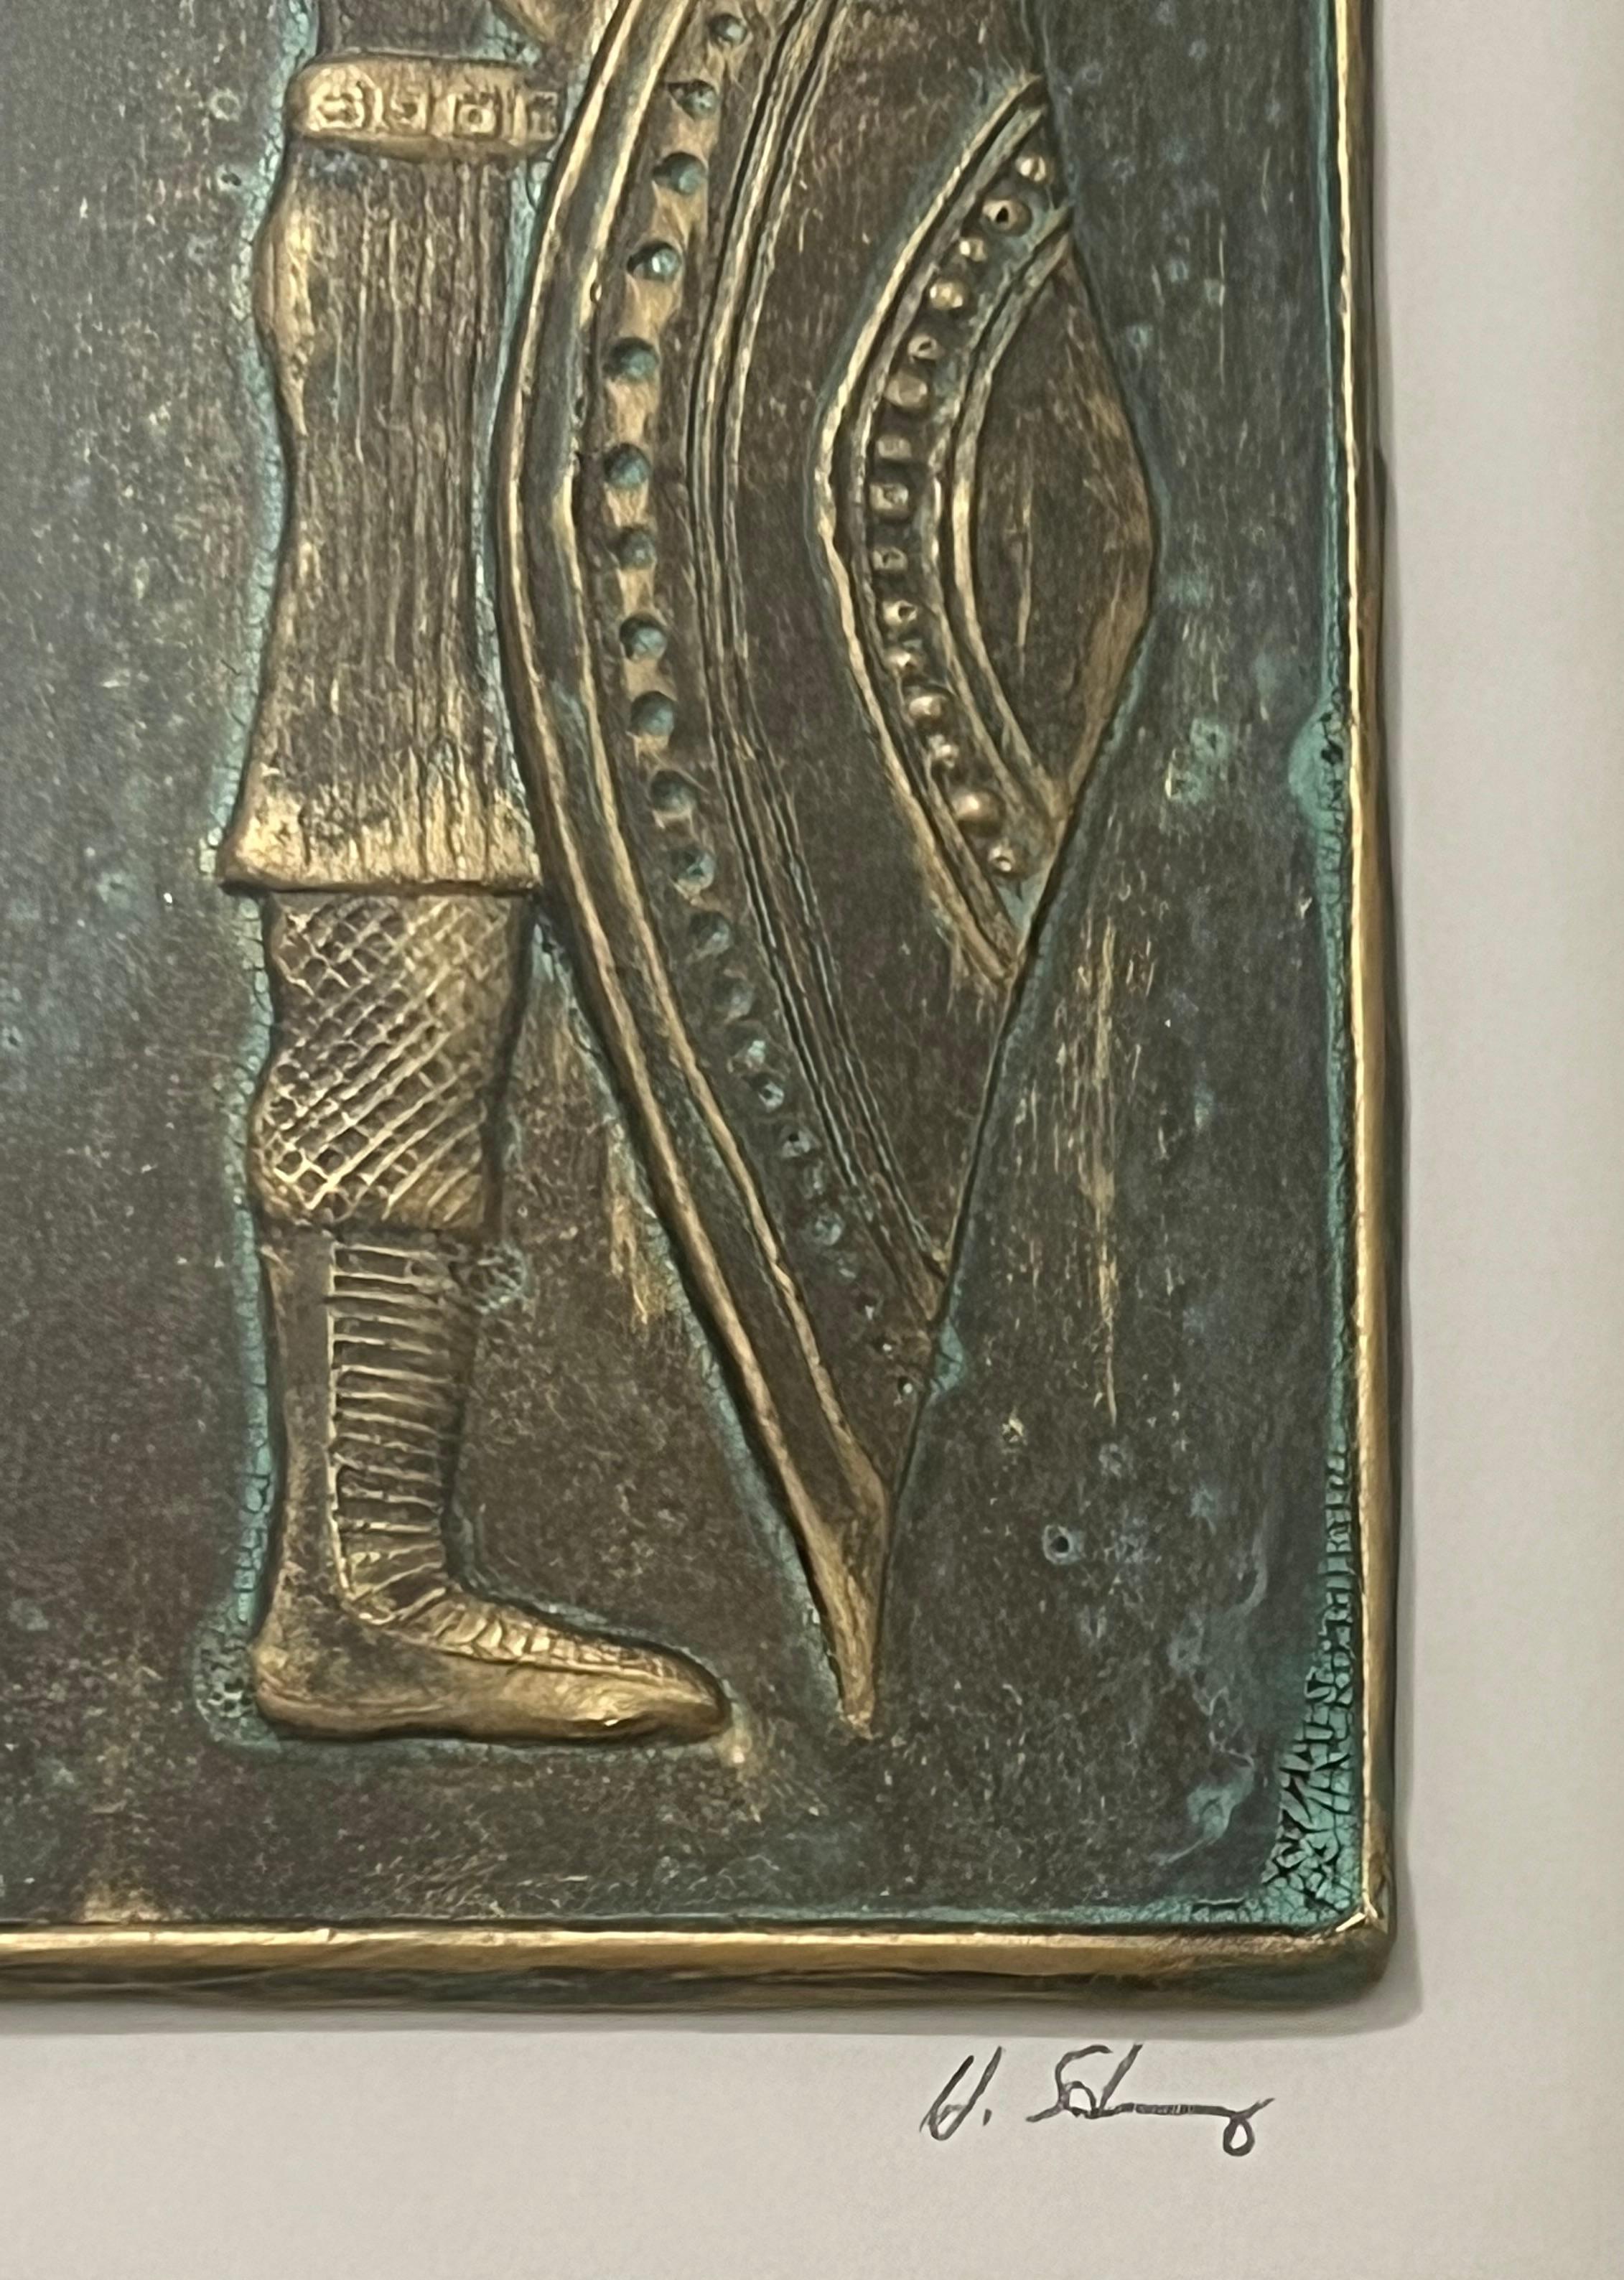 Rare Mid Century framed ceramic wall sculpture titled “Warrior I” by famed artist Harris Strong (1920-2006).  Stunning tile art depicting a bearded warrior holding a shield. The sculpture has been painted in gold leaf.  The piece is accentuated by